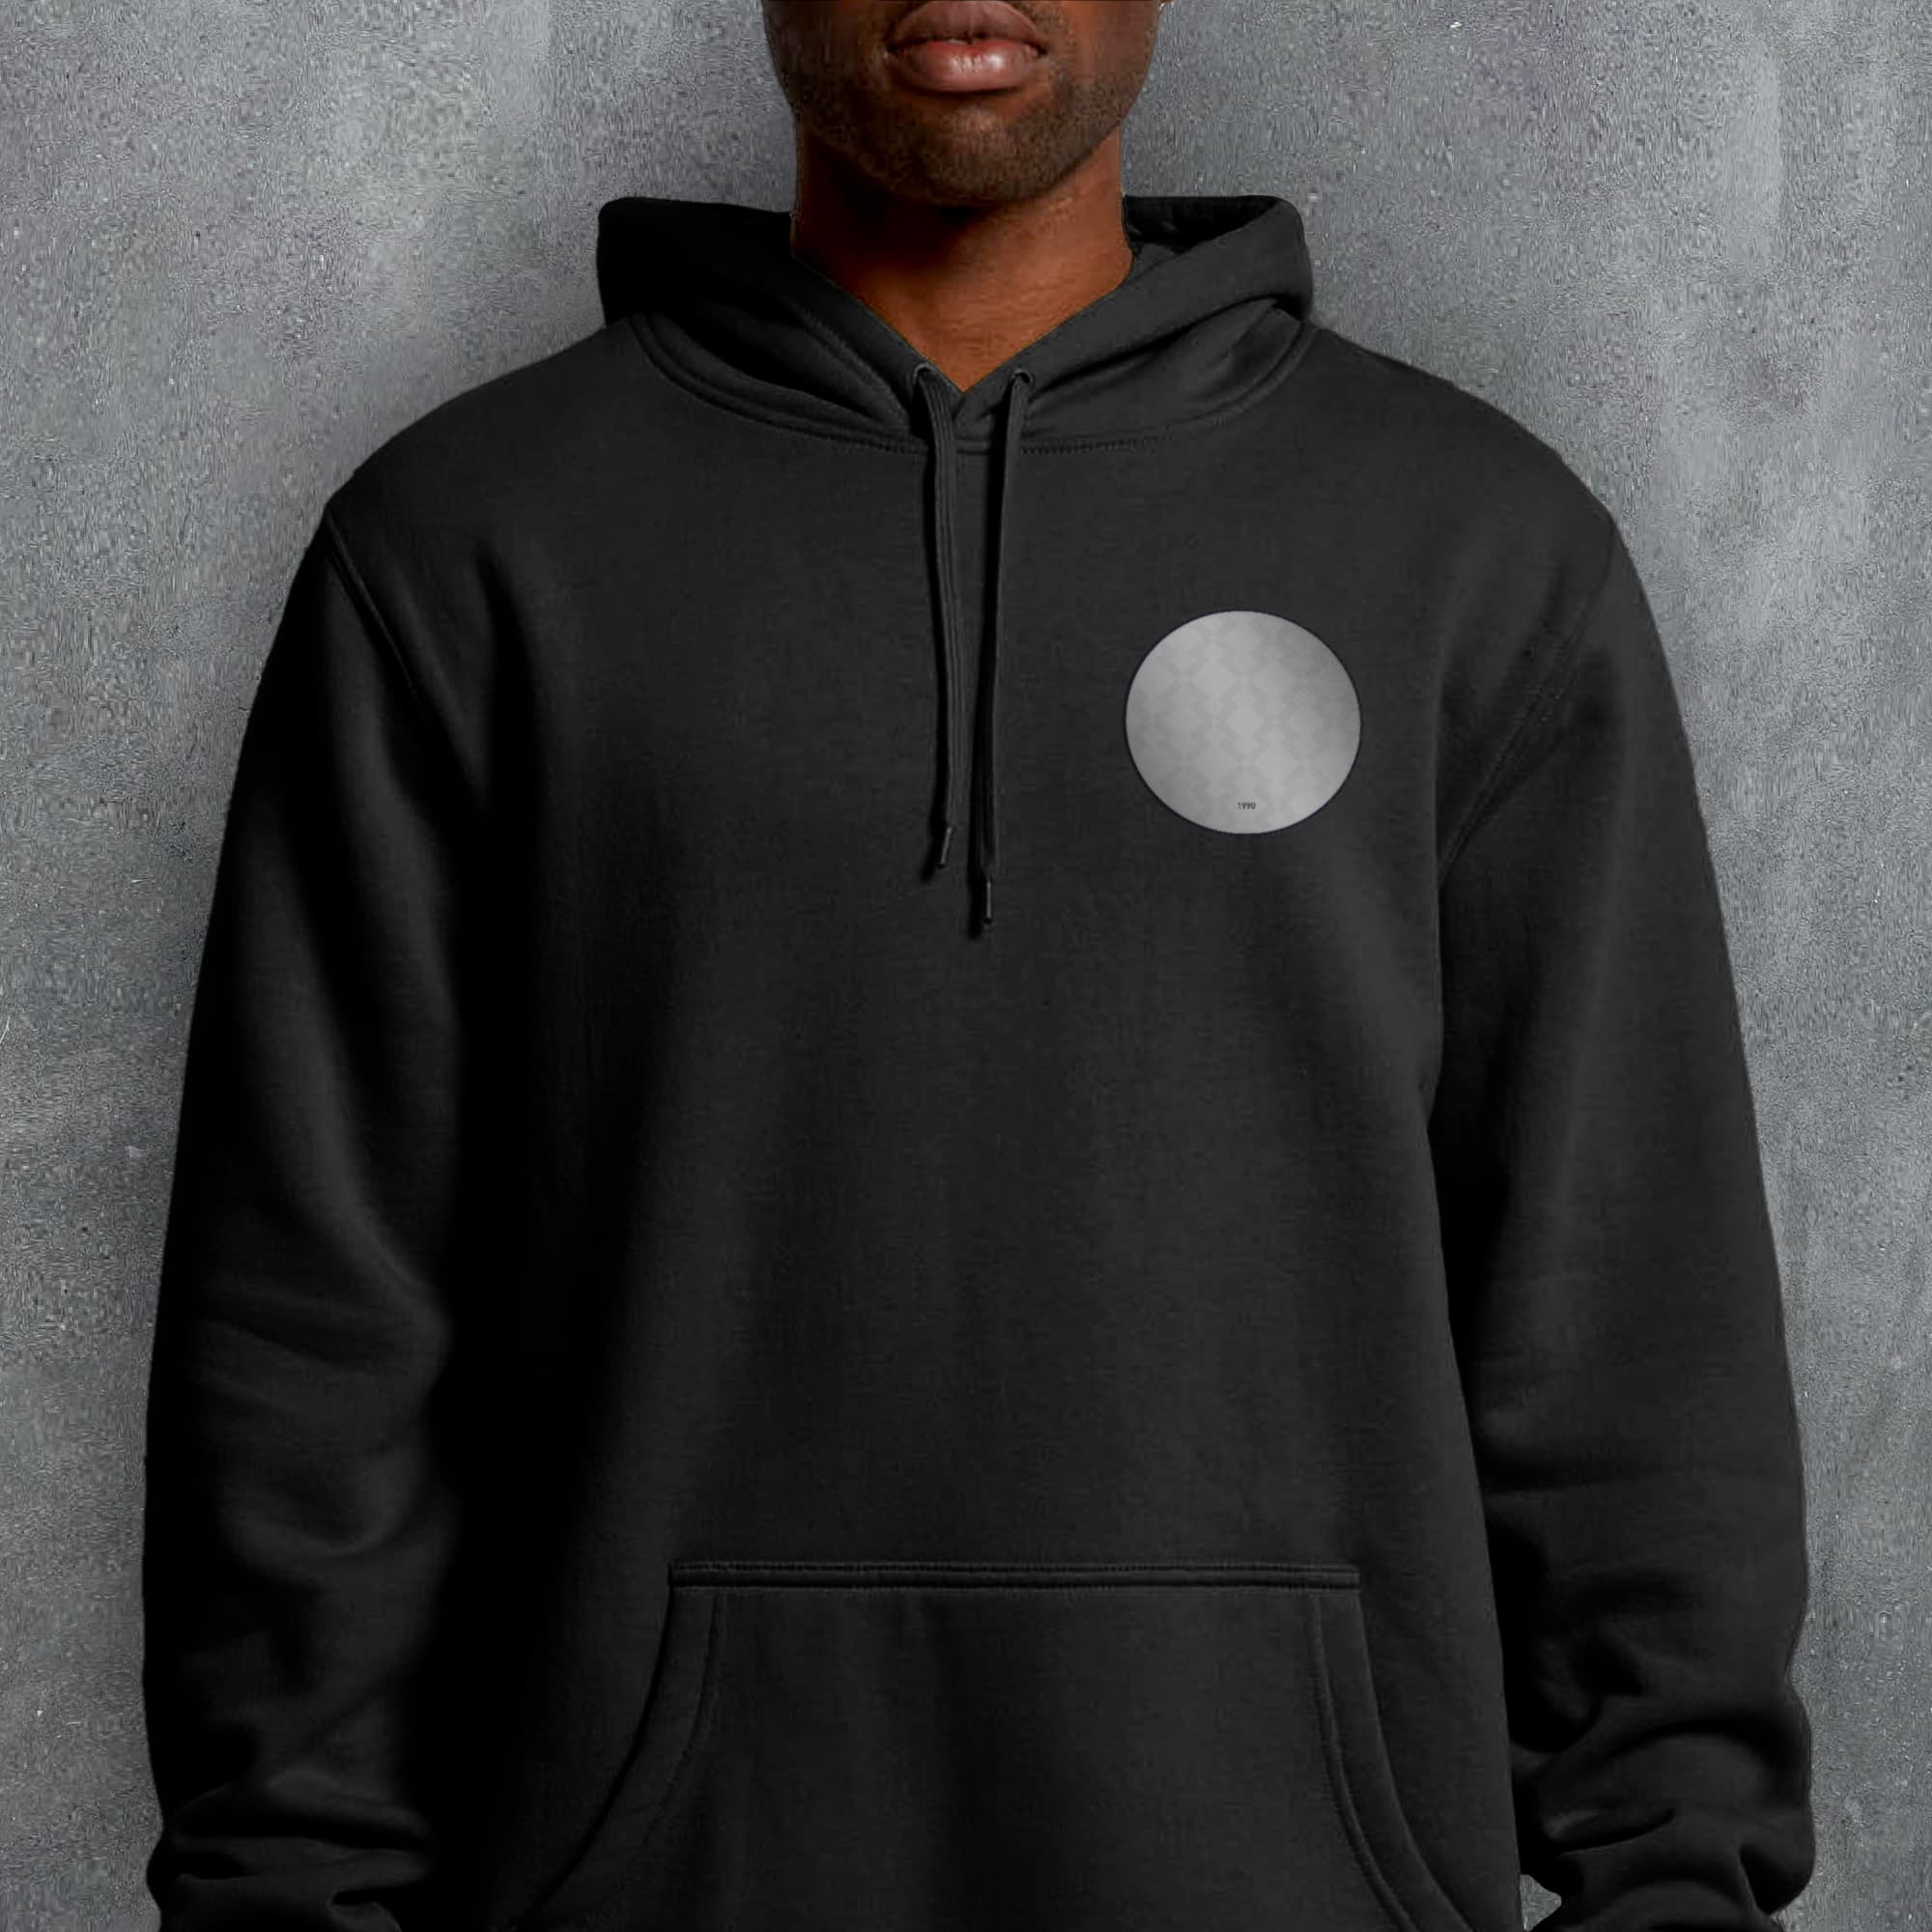 a man wearing a black hoodie with a white circle on it